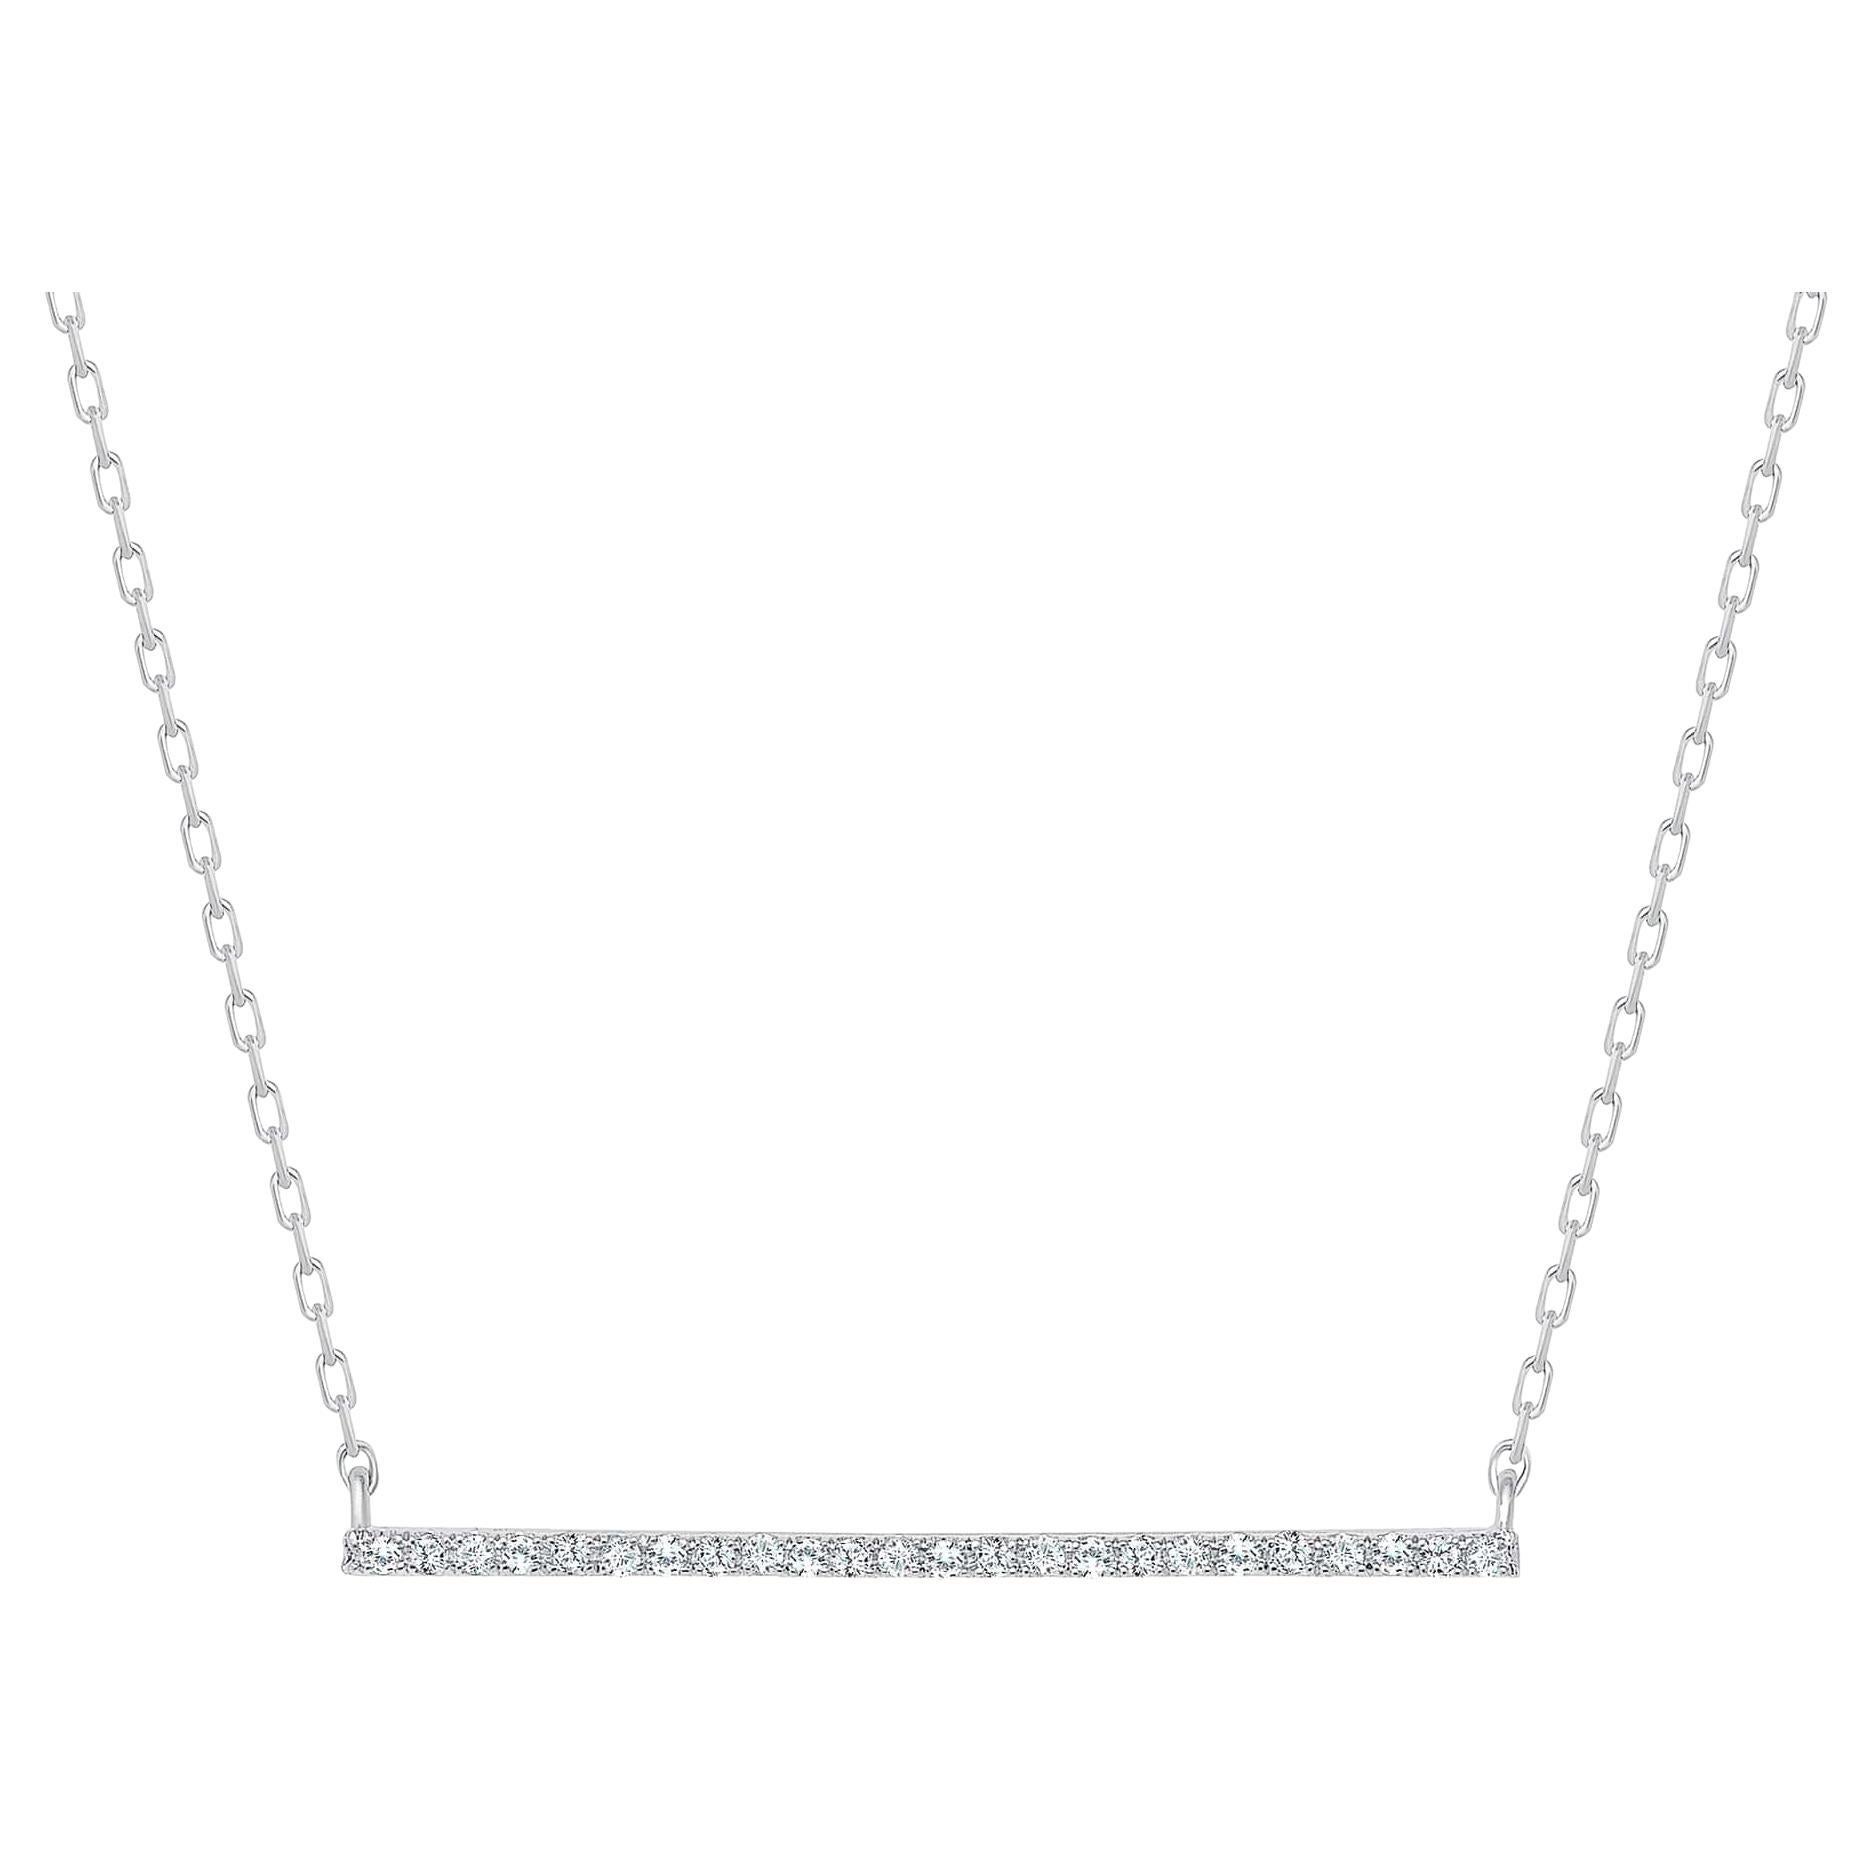 This Round Diamond Bar Necklace provides cute and fashionable on trend look. Great choice as gifts for Anniversary, Birthday, Graduation, Valentine's, and Holidays.

Metal : 14k Gold, 18k Gold, Platinum
Diamond Cut : Round Cut Natural
Total Diamond